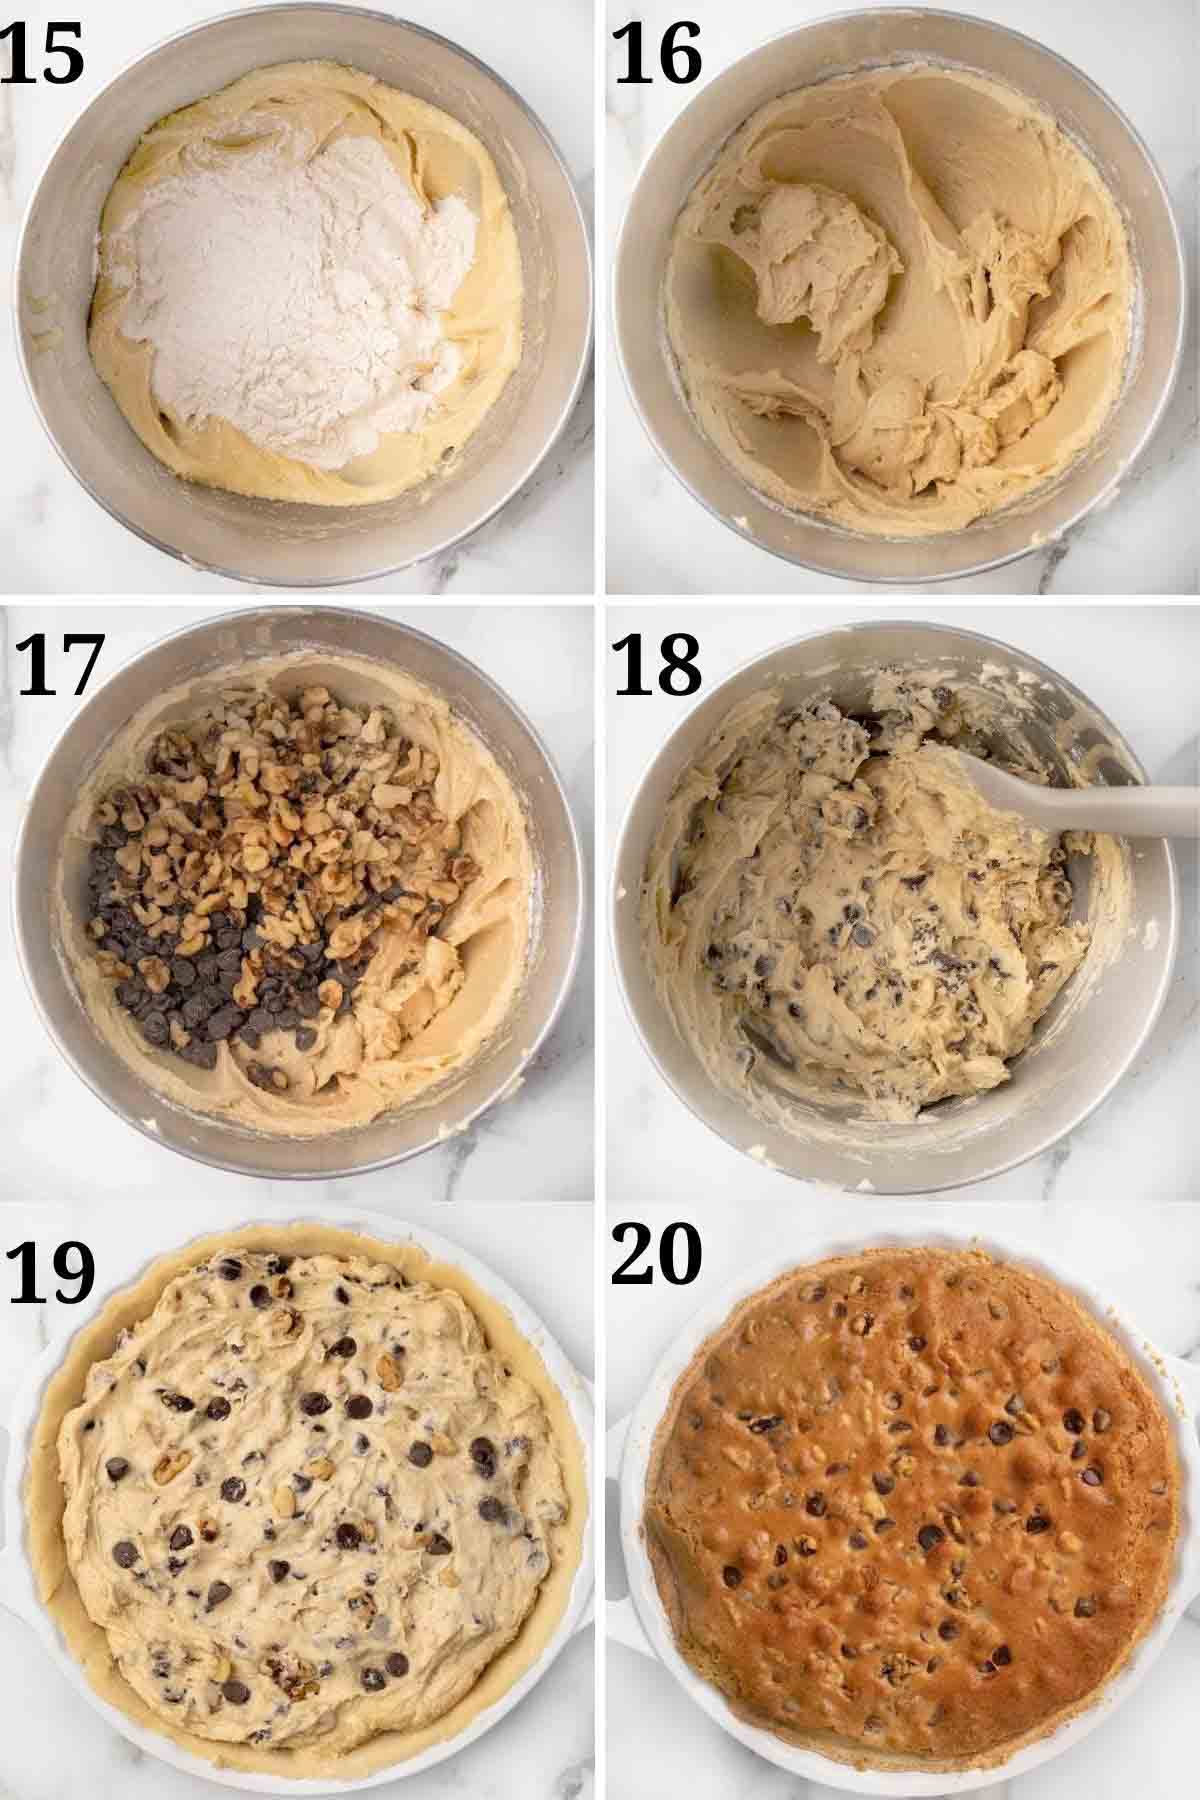 six images showing how to finish making the pie filling and baking the cookie pie